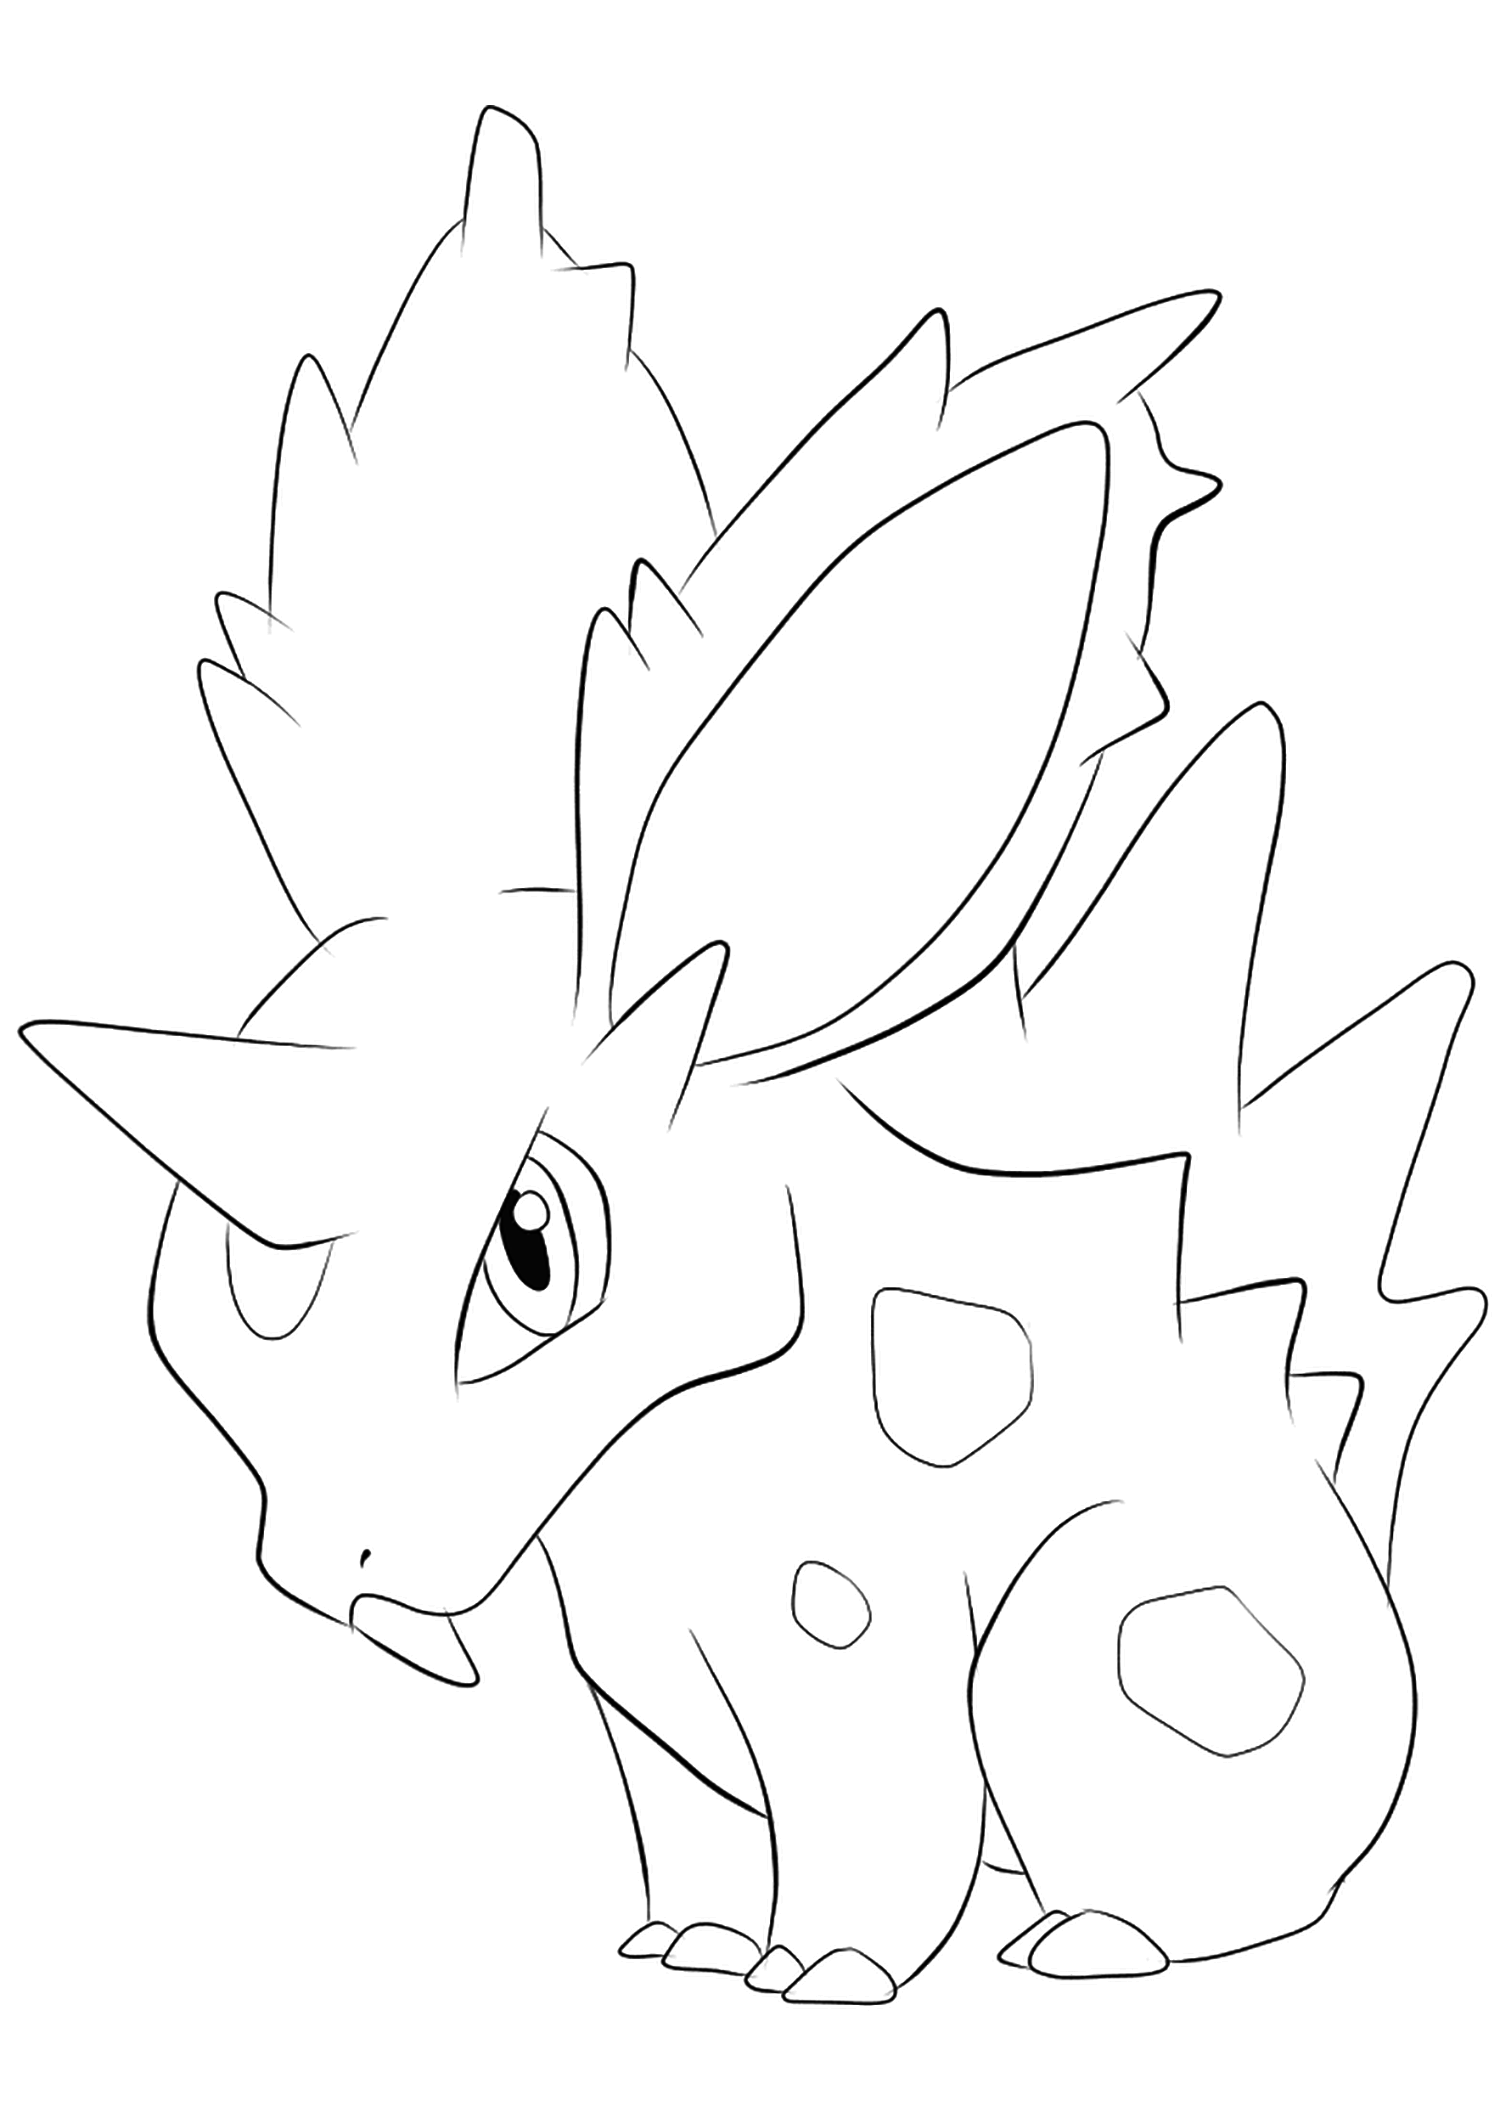 Nidoran? (No.32). Nidoran? Coloring page, Generation I Pokemon of type PoisonOriginal image credit: Pokemon linearts by Lilly Gerbil'font-size:smaller;color:gray'>Permission: All rights reserved © Pokemon company and Ken Sugimori.